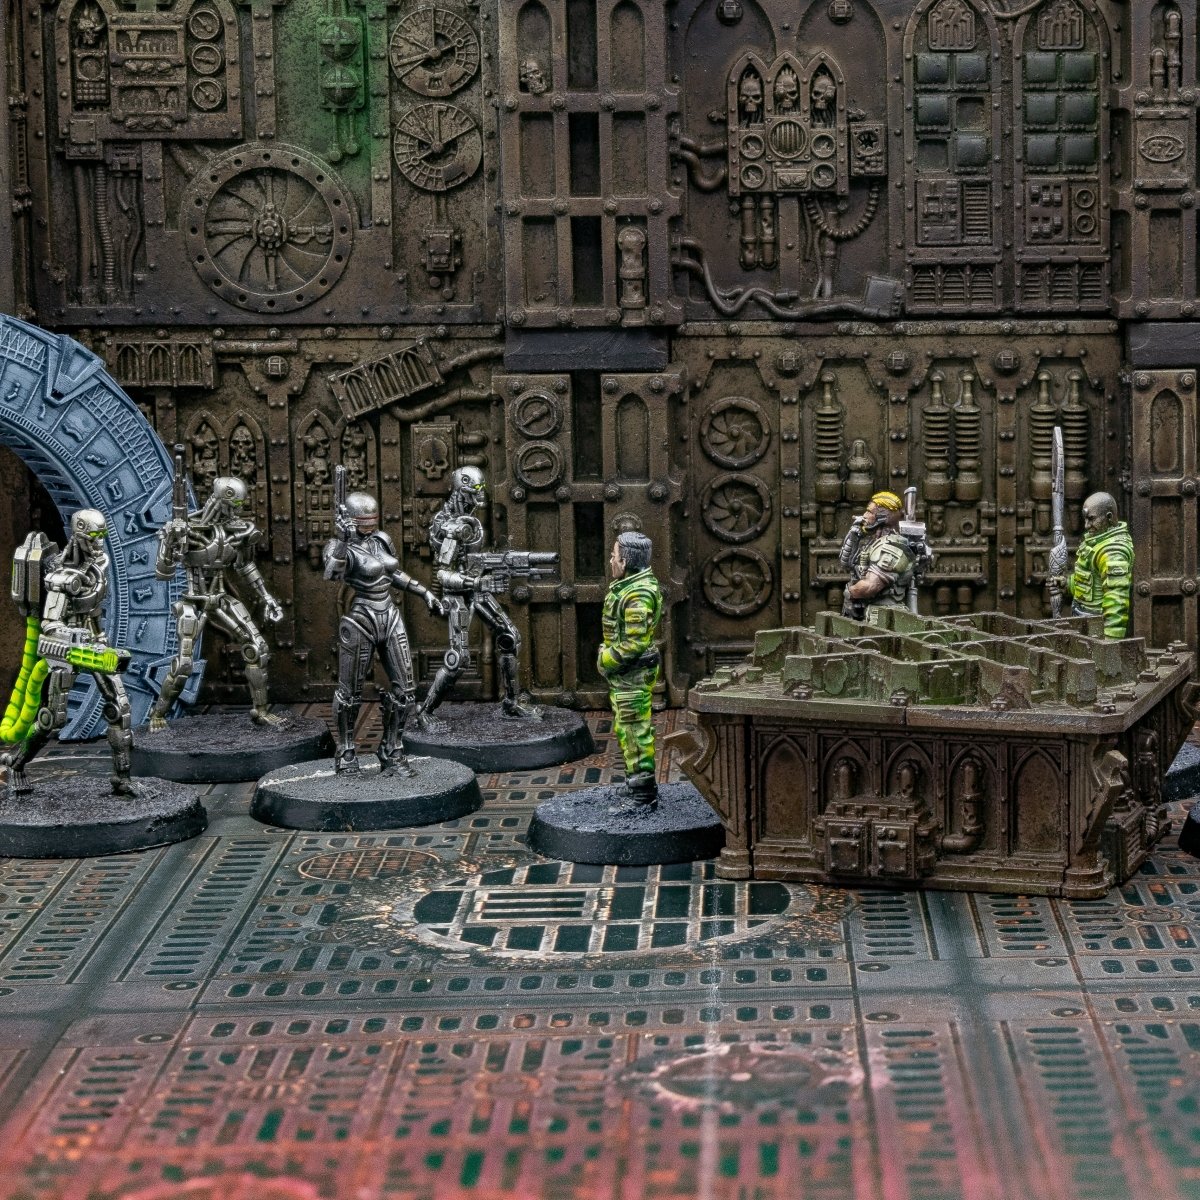 Monthly Miniatures Mystery Box Subscription - We Print Miniatures -We Print Miniatures